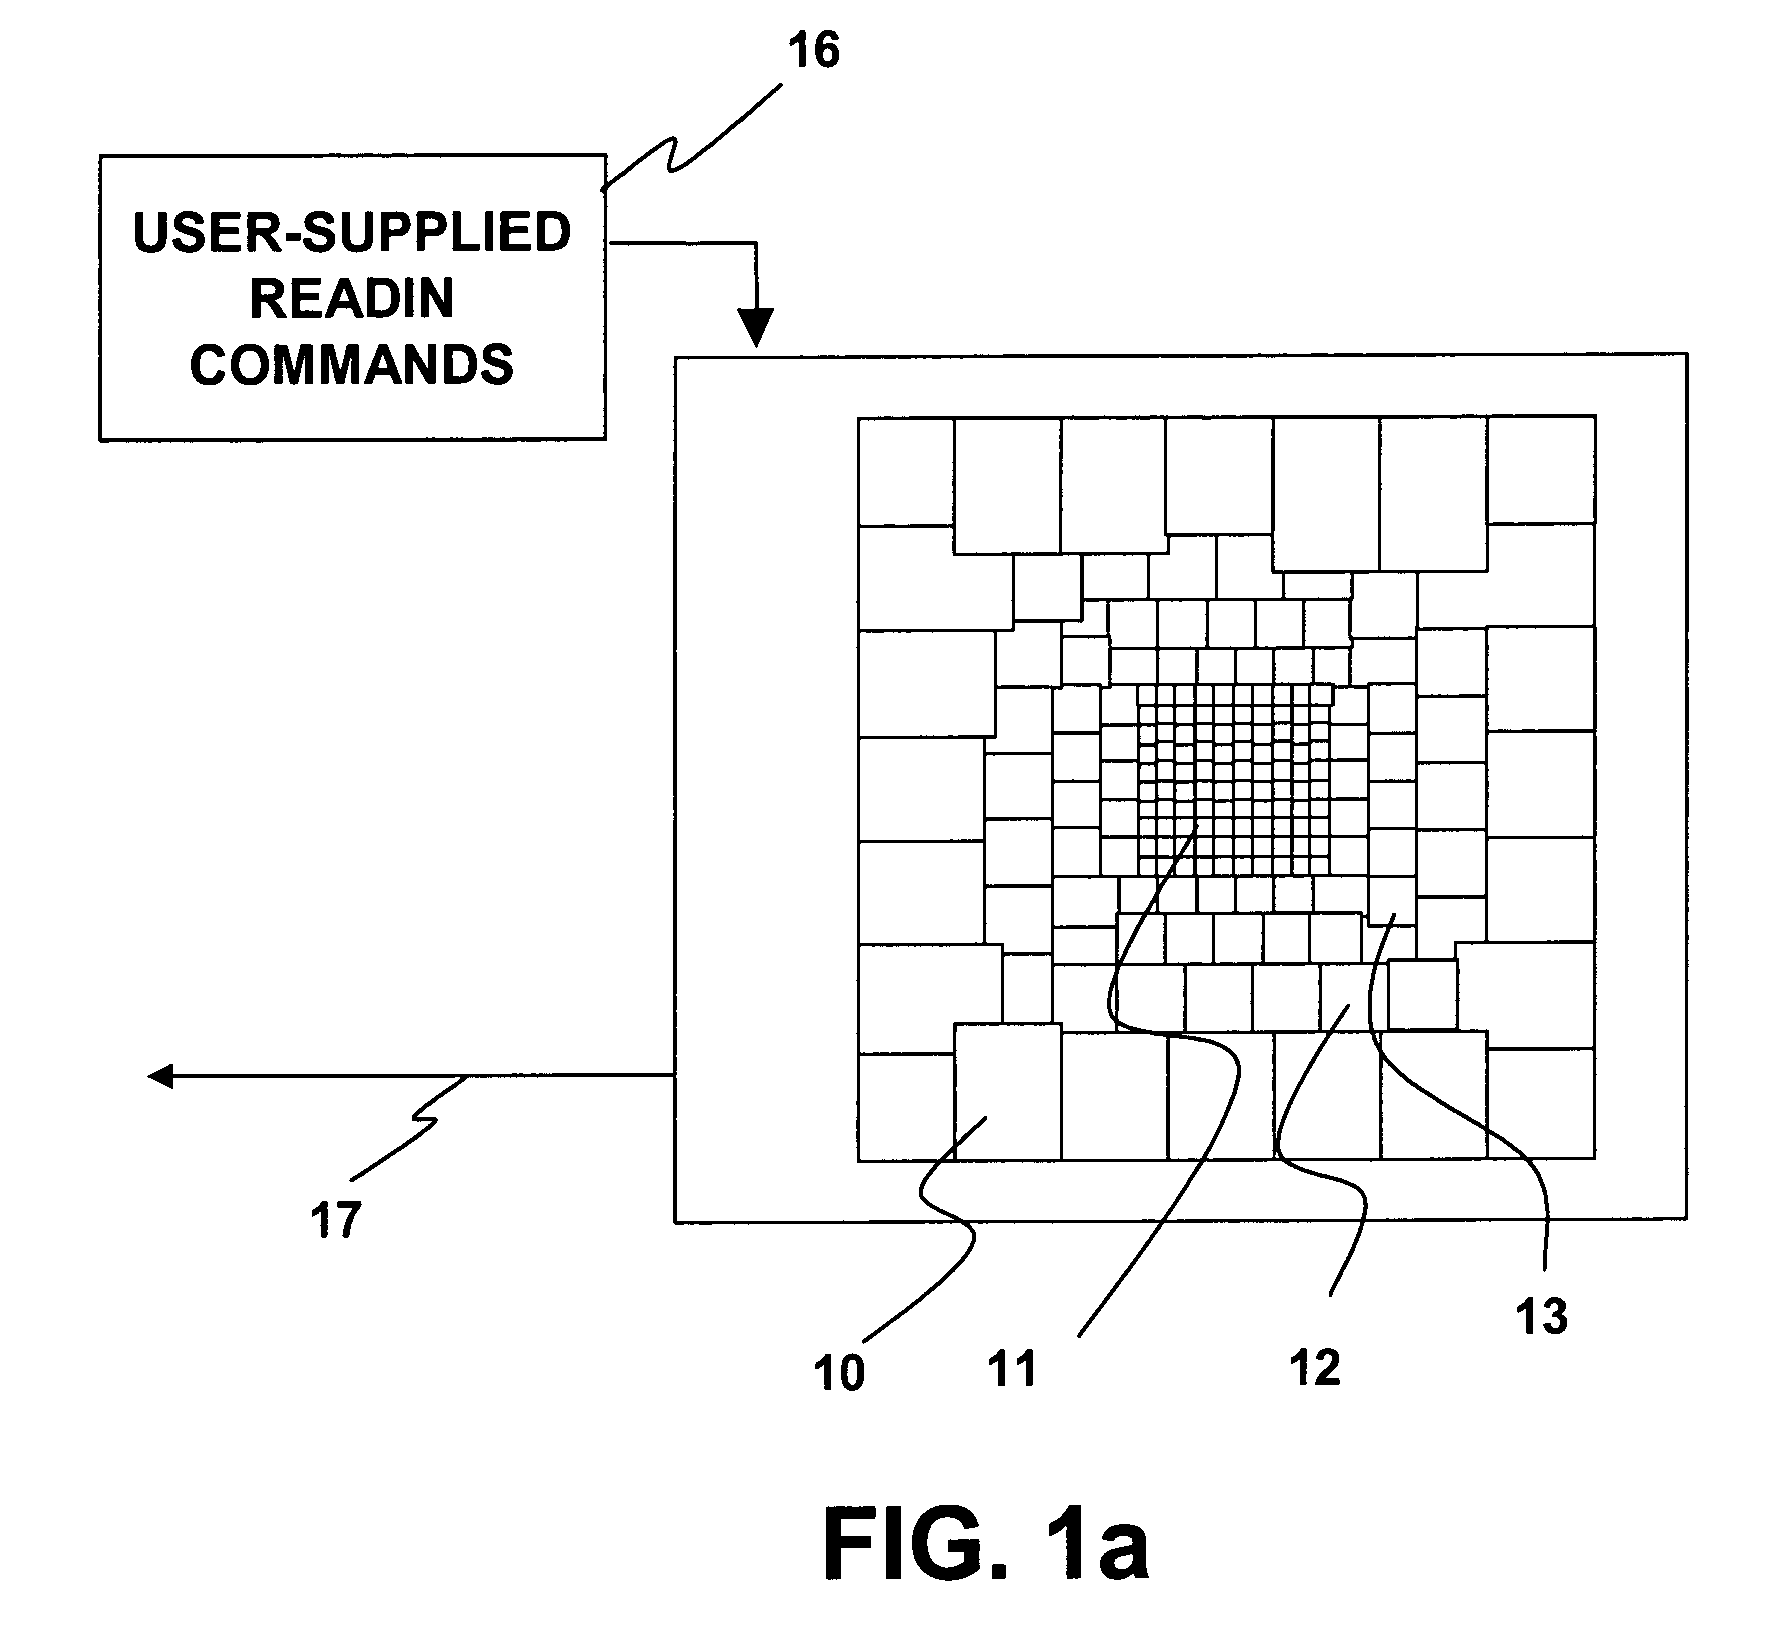 Method and apparatus for an on-chip variable acuity imager array incorporating roll, pitch and yaw angle rates measurement